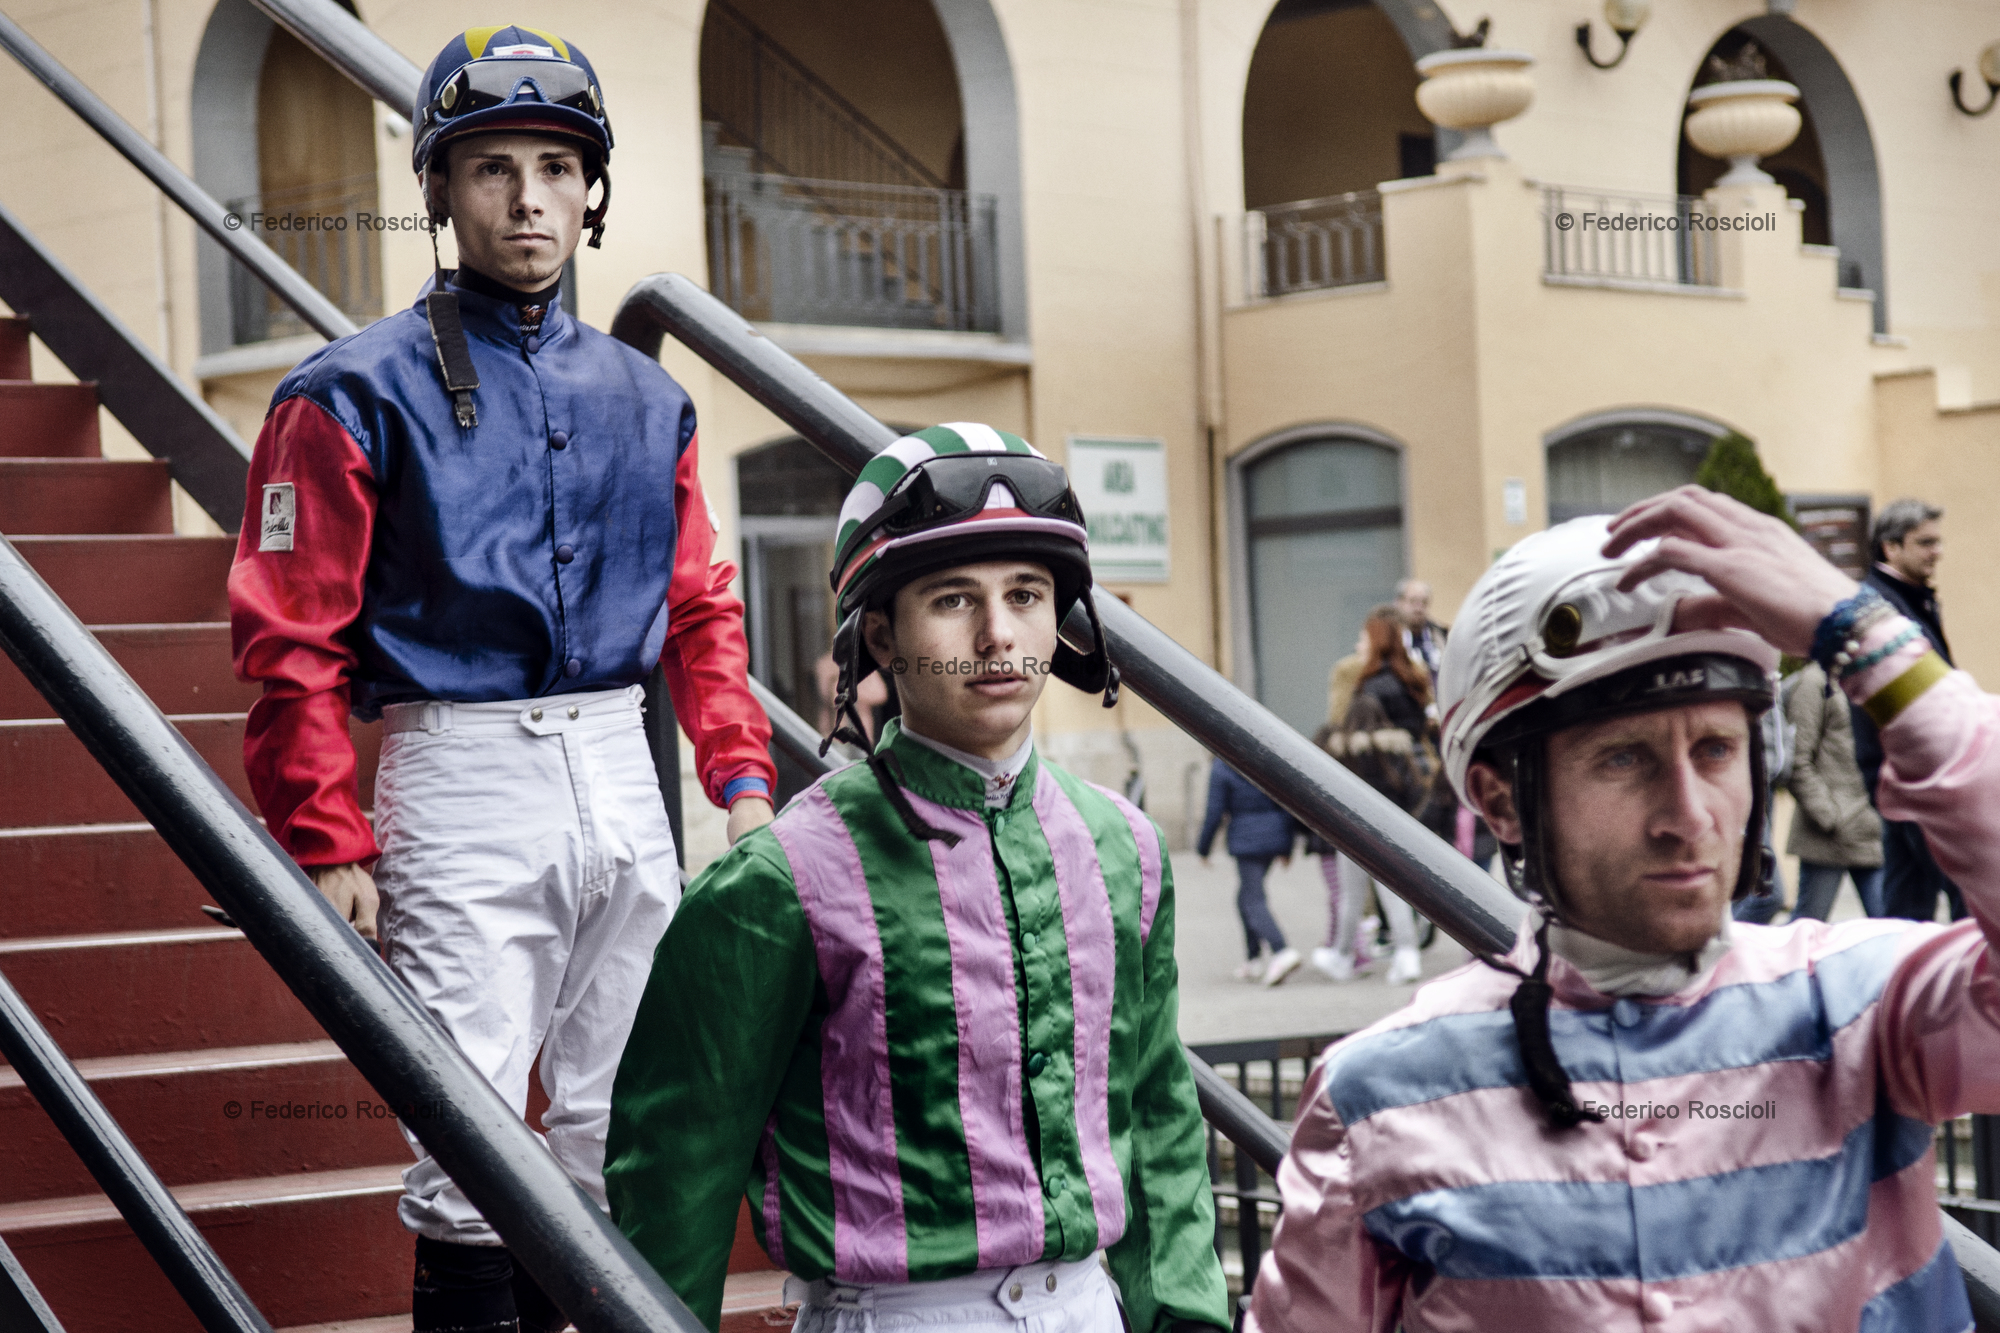 Rome, Italy. April 1, 2013. Jockeys ready for the race. They are completely independent by the teams, they could even race for different teams in the same day.